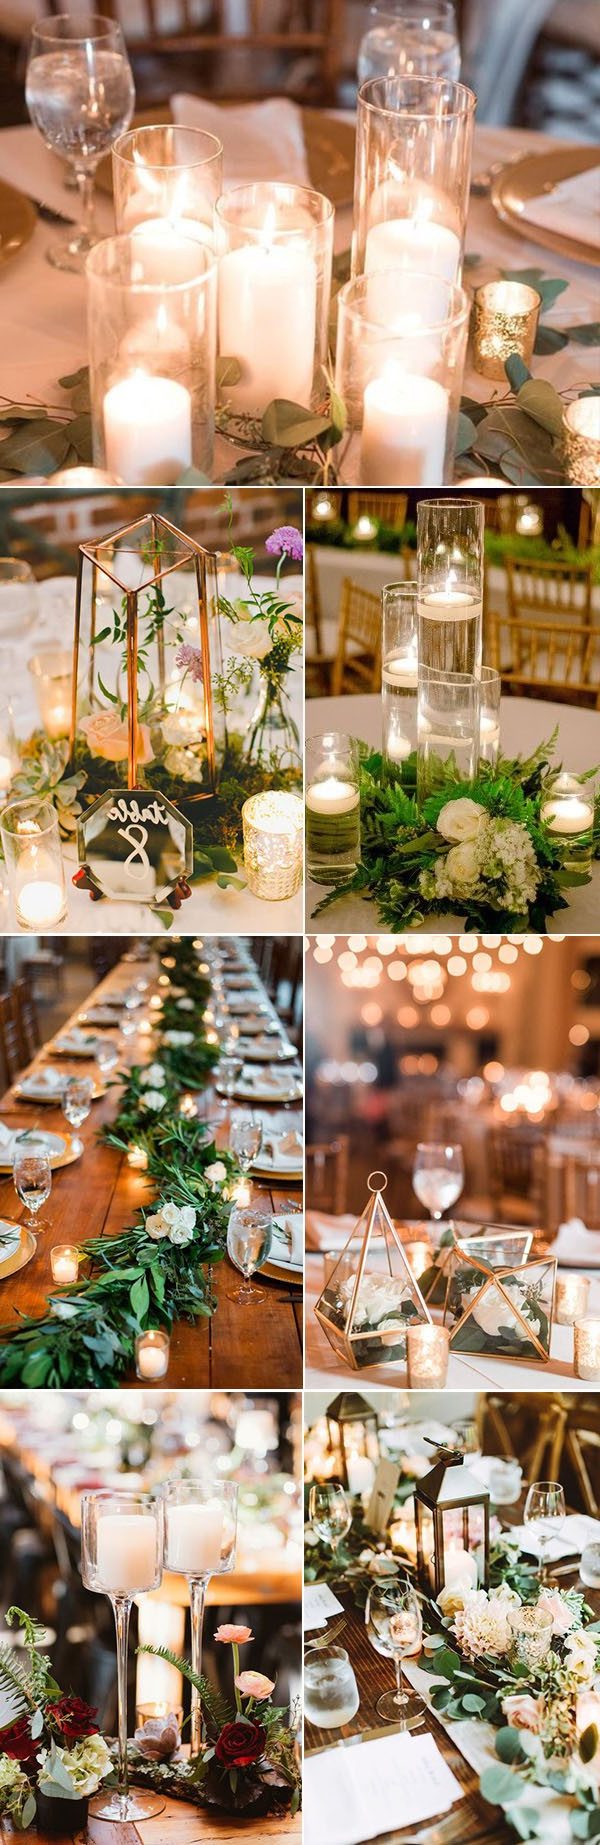 Bright candlelight the stunning wedding table centerpieces with metal decors